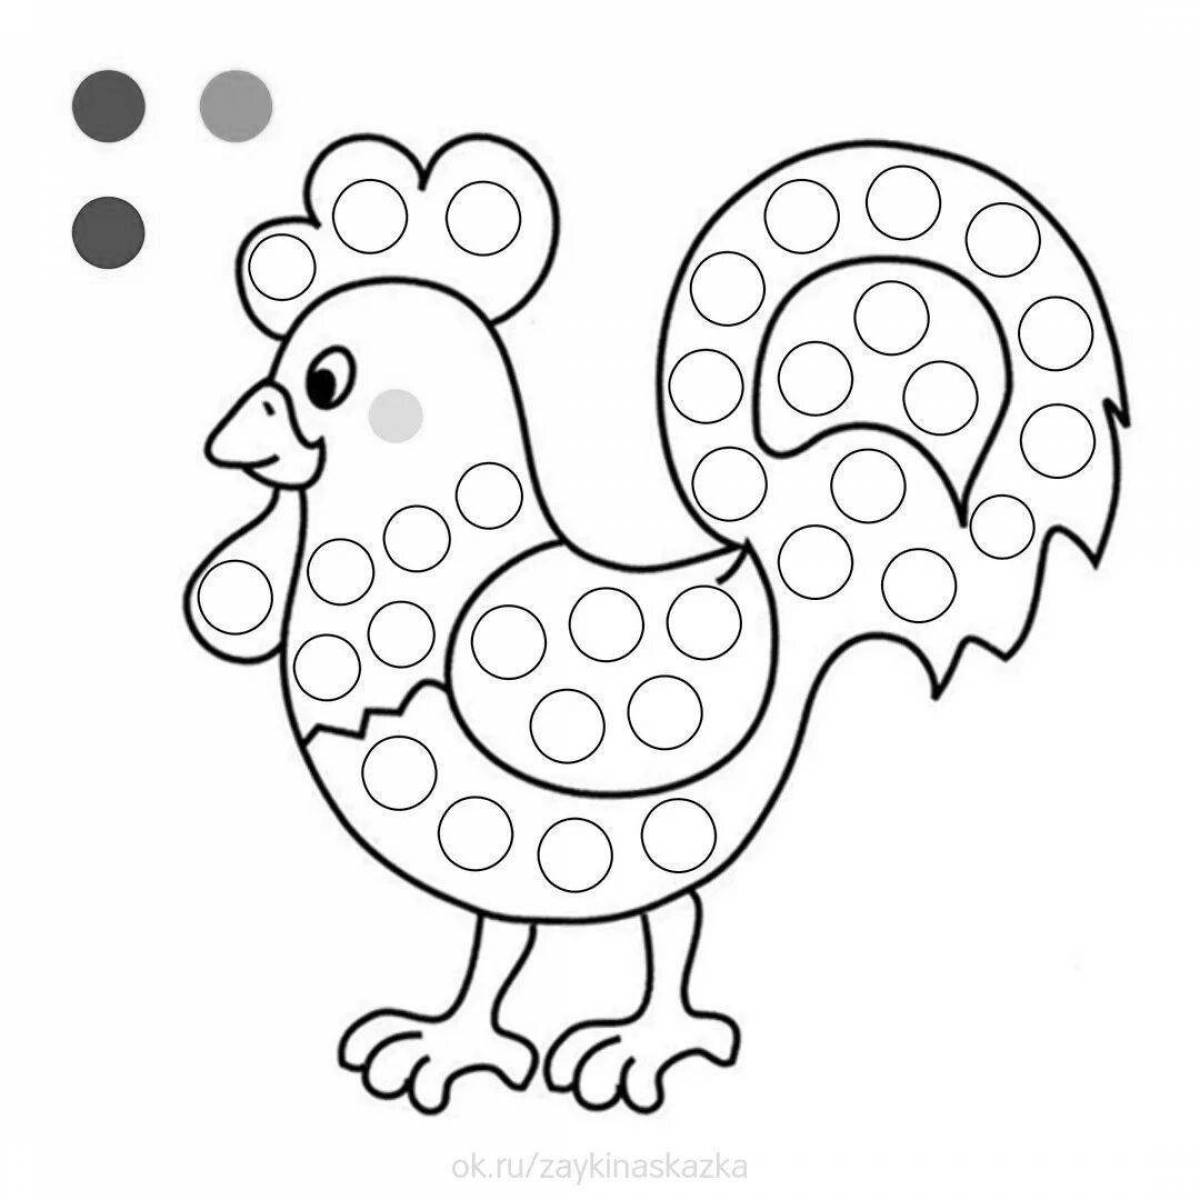 Intriguing simulation coloring page